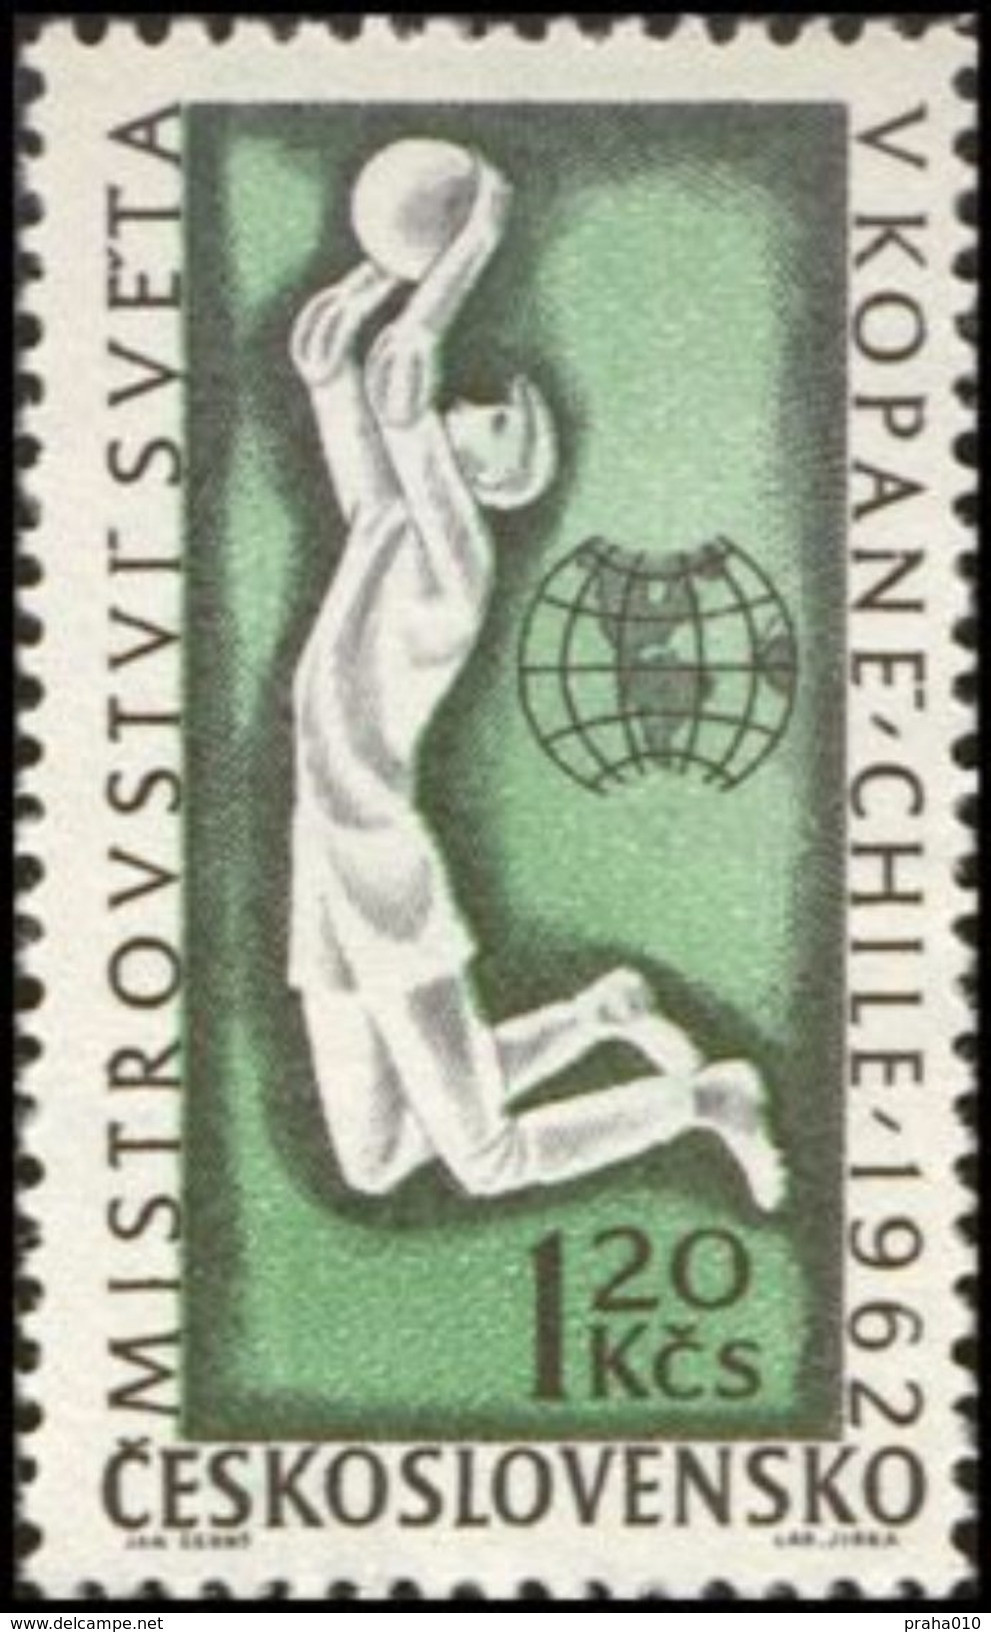 Czechoslovakia / Stamps (1962) 1231: Sport - Soccer World Cup, Chile 1962 (goalkeeper); Painter: Anna Podzemna - 1962 – Chile